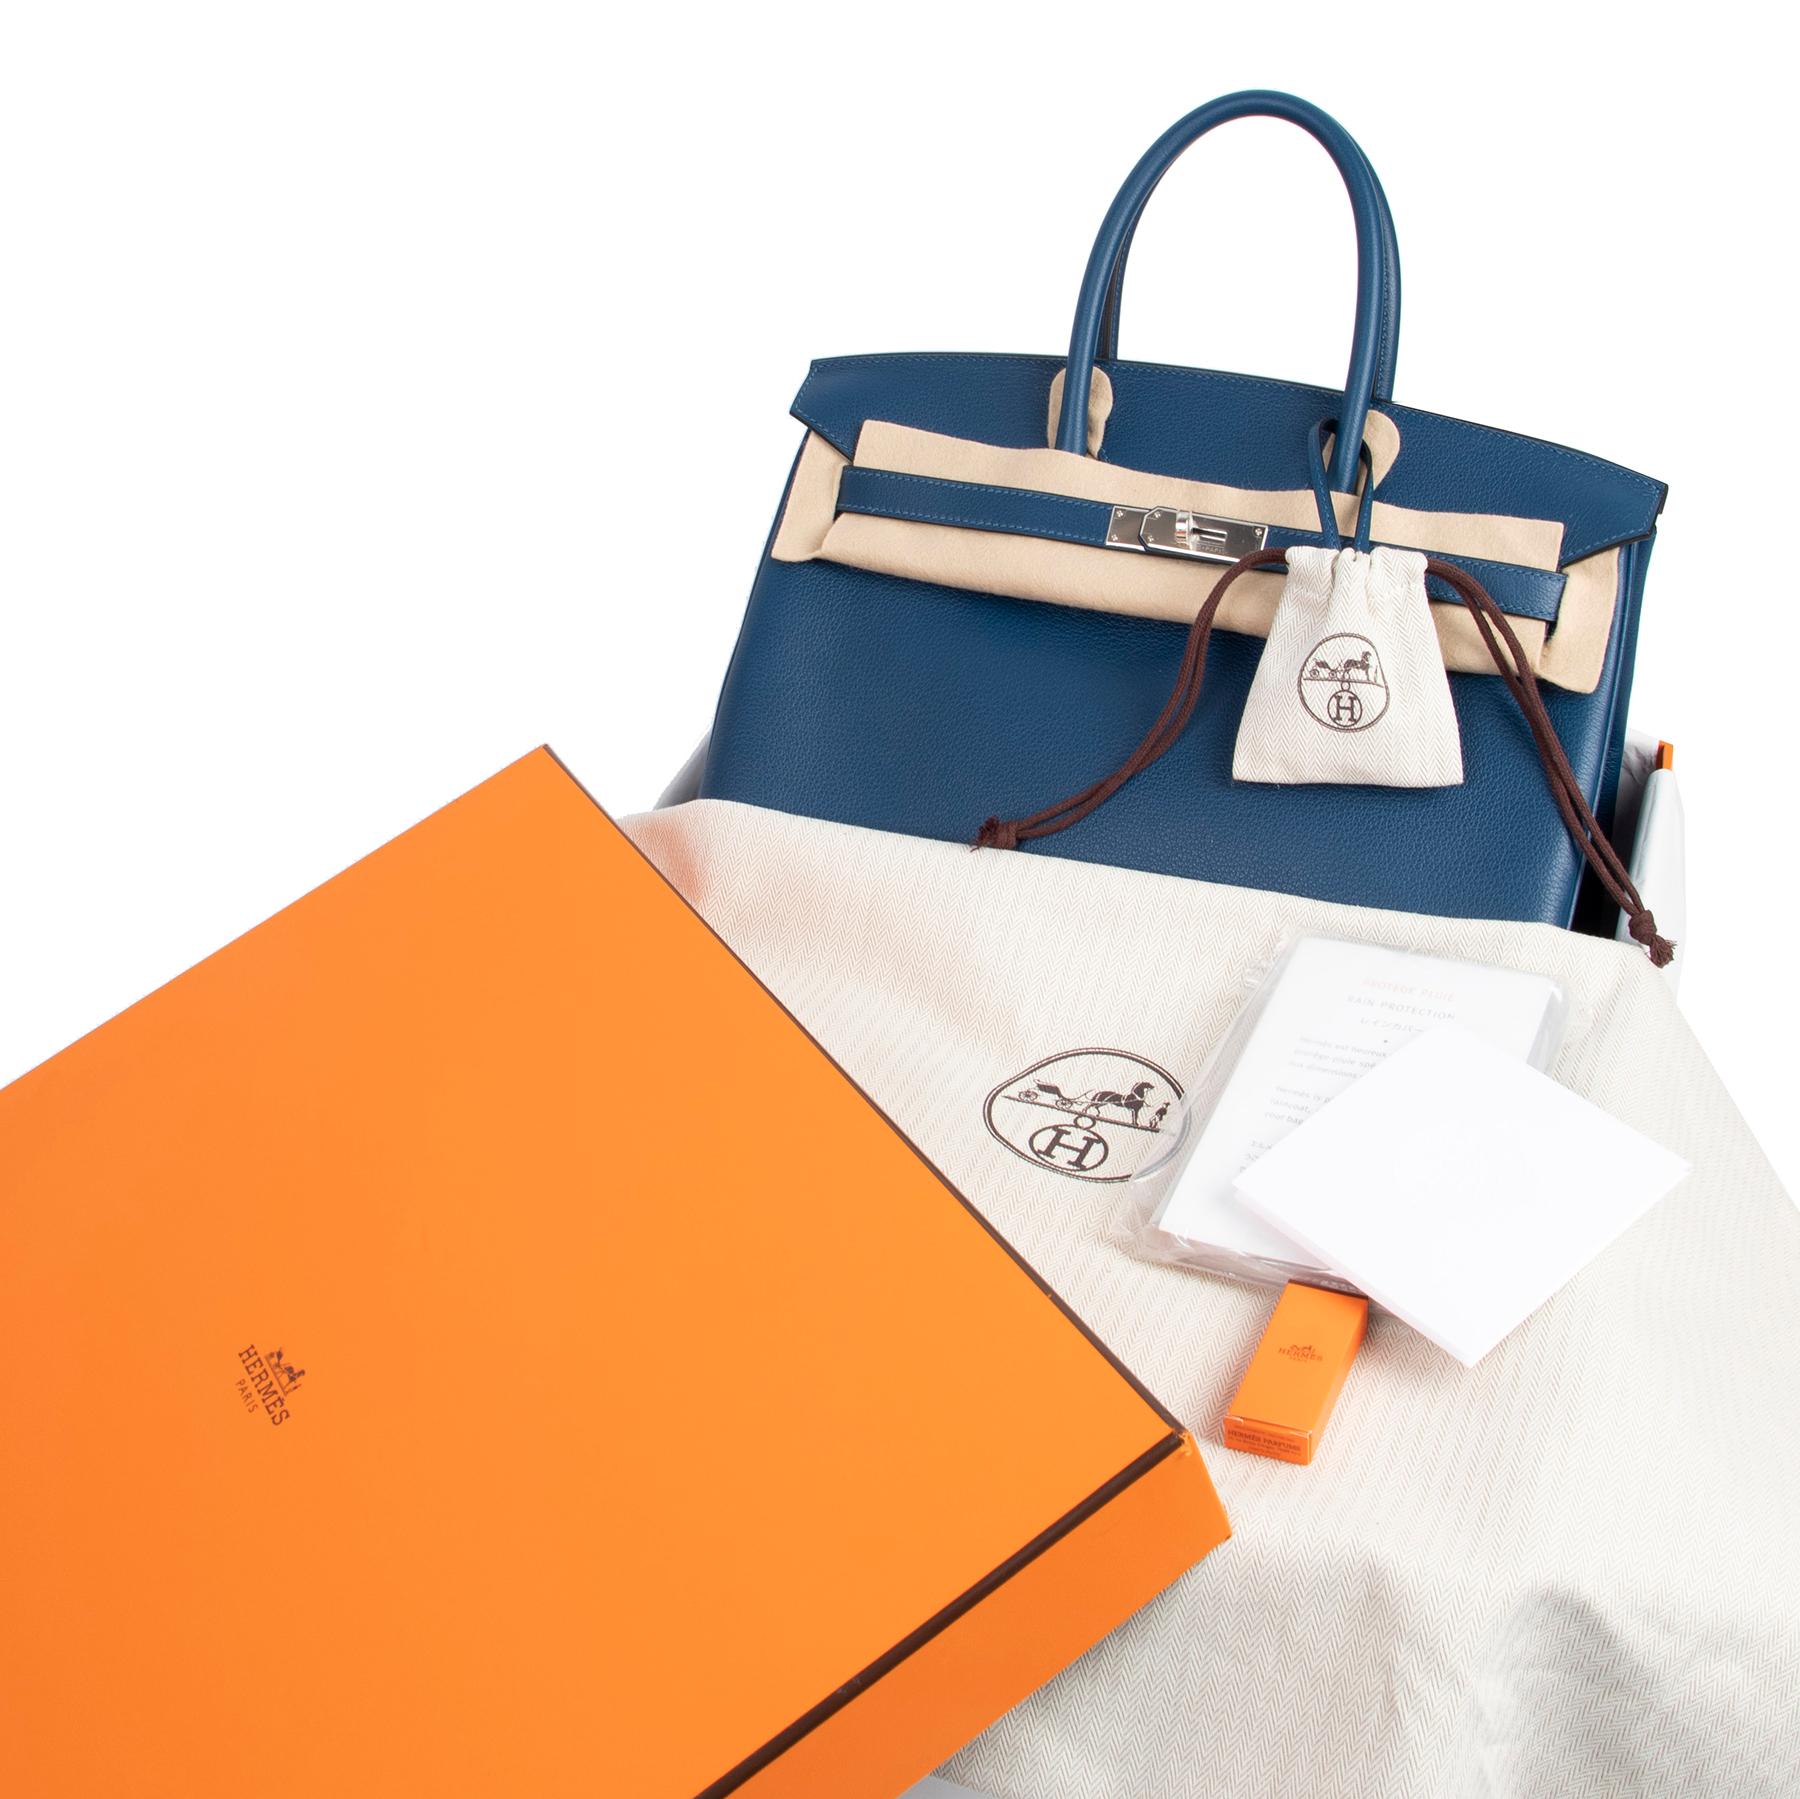 Hermès Birkin 35 Taurillon Novillo Deep Blue PHW

This brand new Hermès Birkin is crafted out of finely grained Taurillon Novillo and comes in a breathtaking shade of blue. The color is deep and has many layers - you'll see it pairs beautifully with